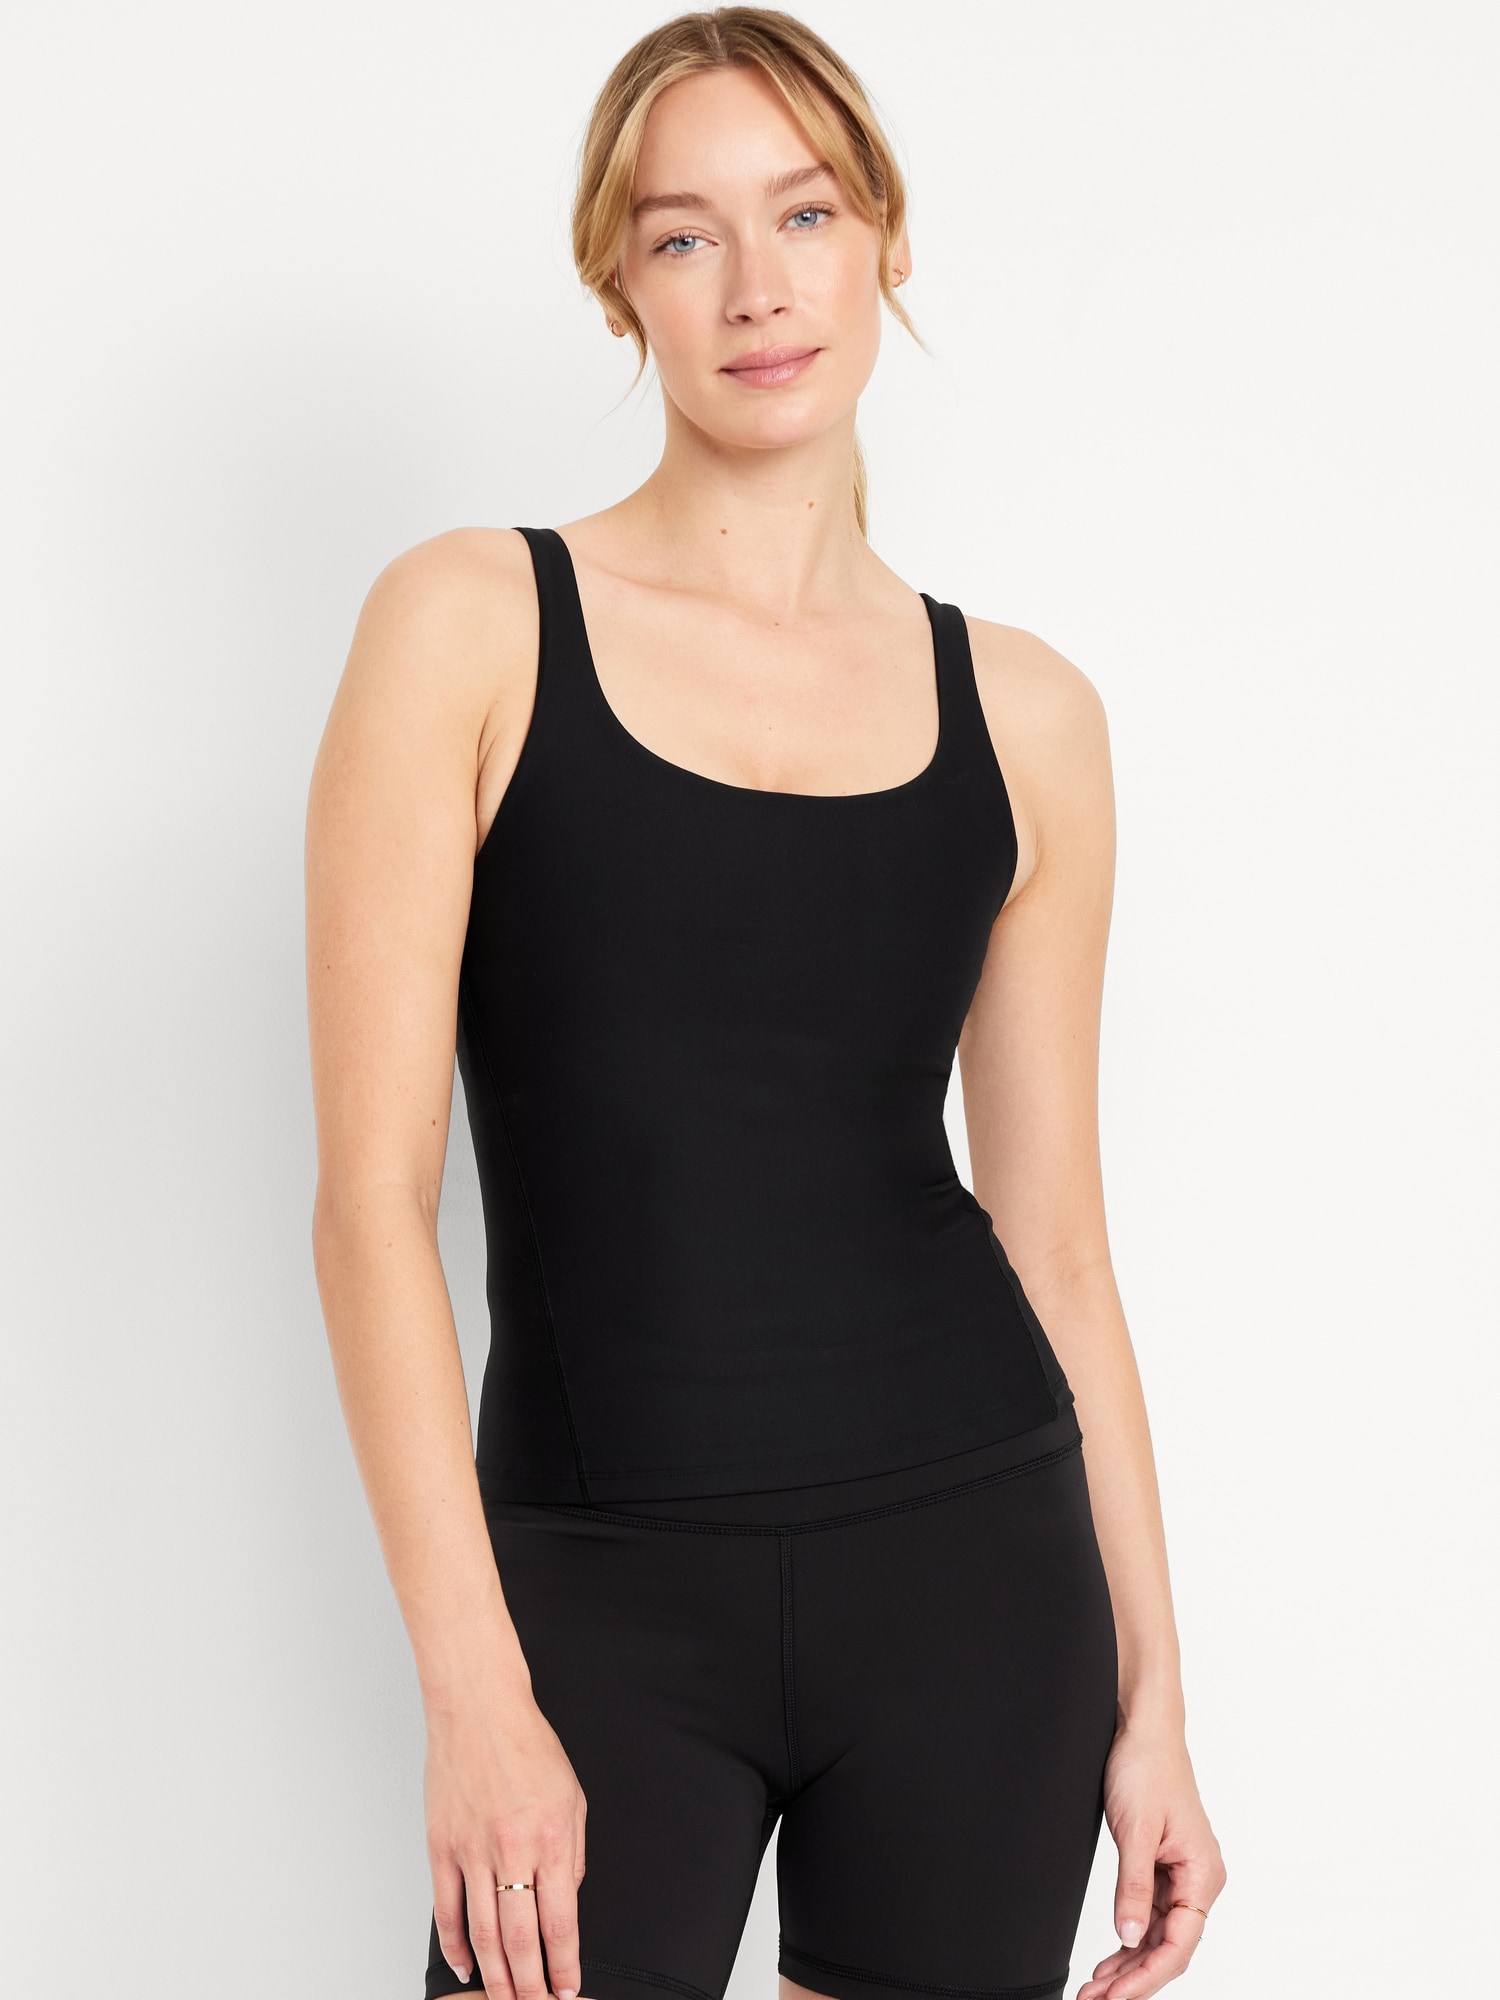 PowerSoft Support Top